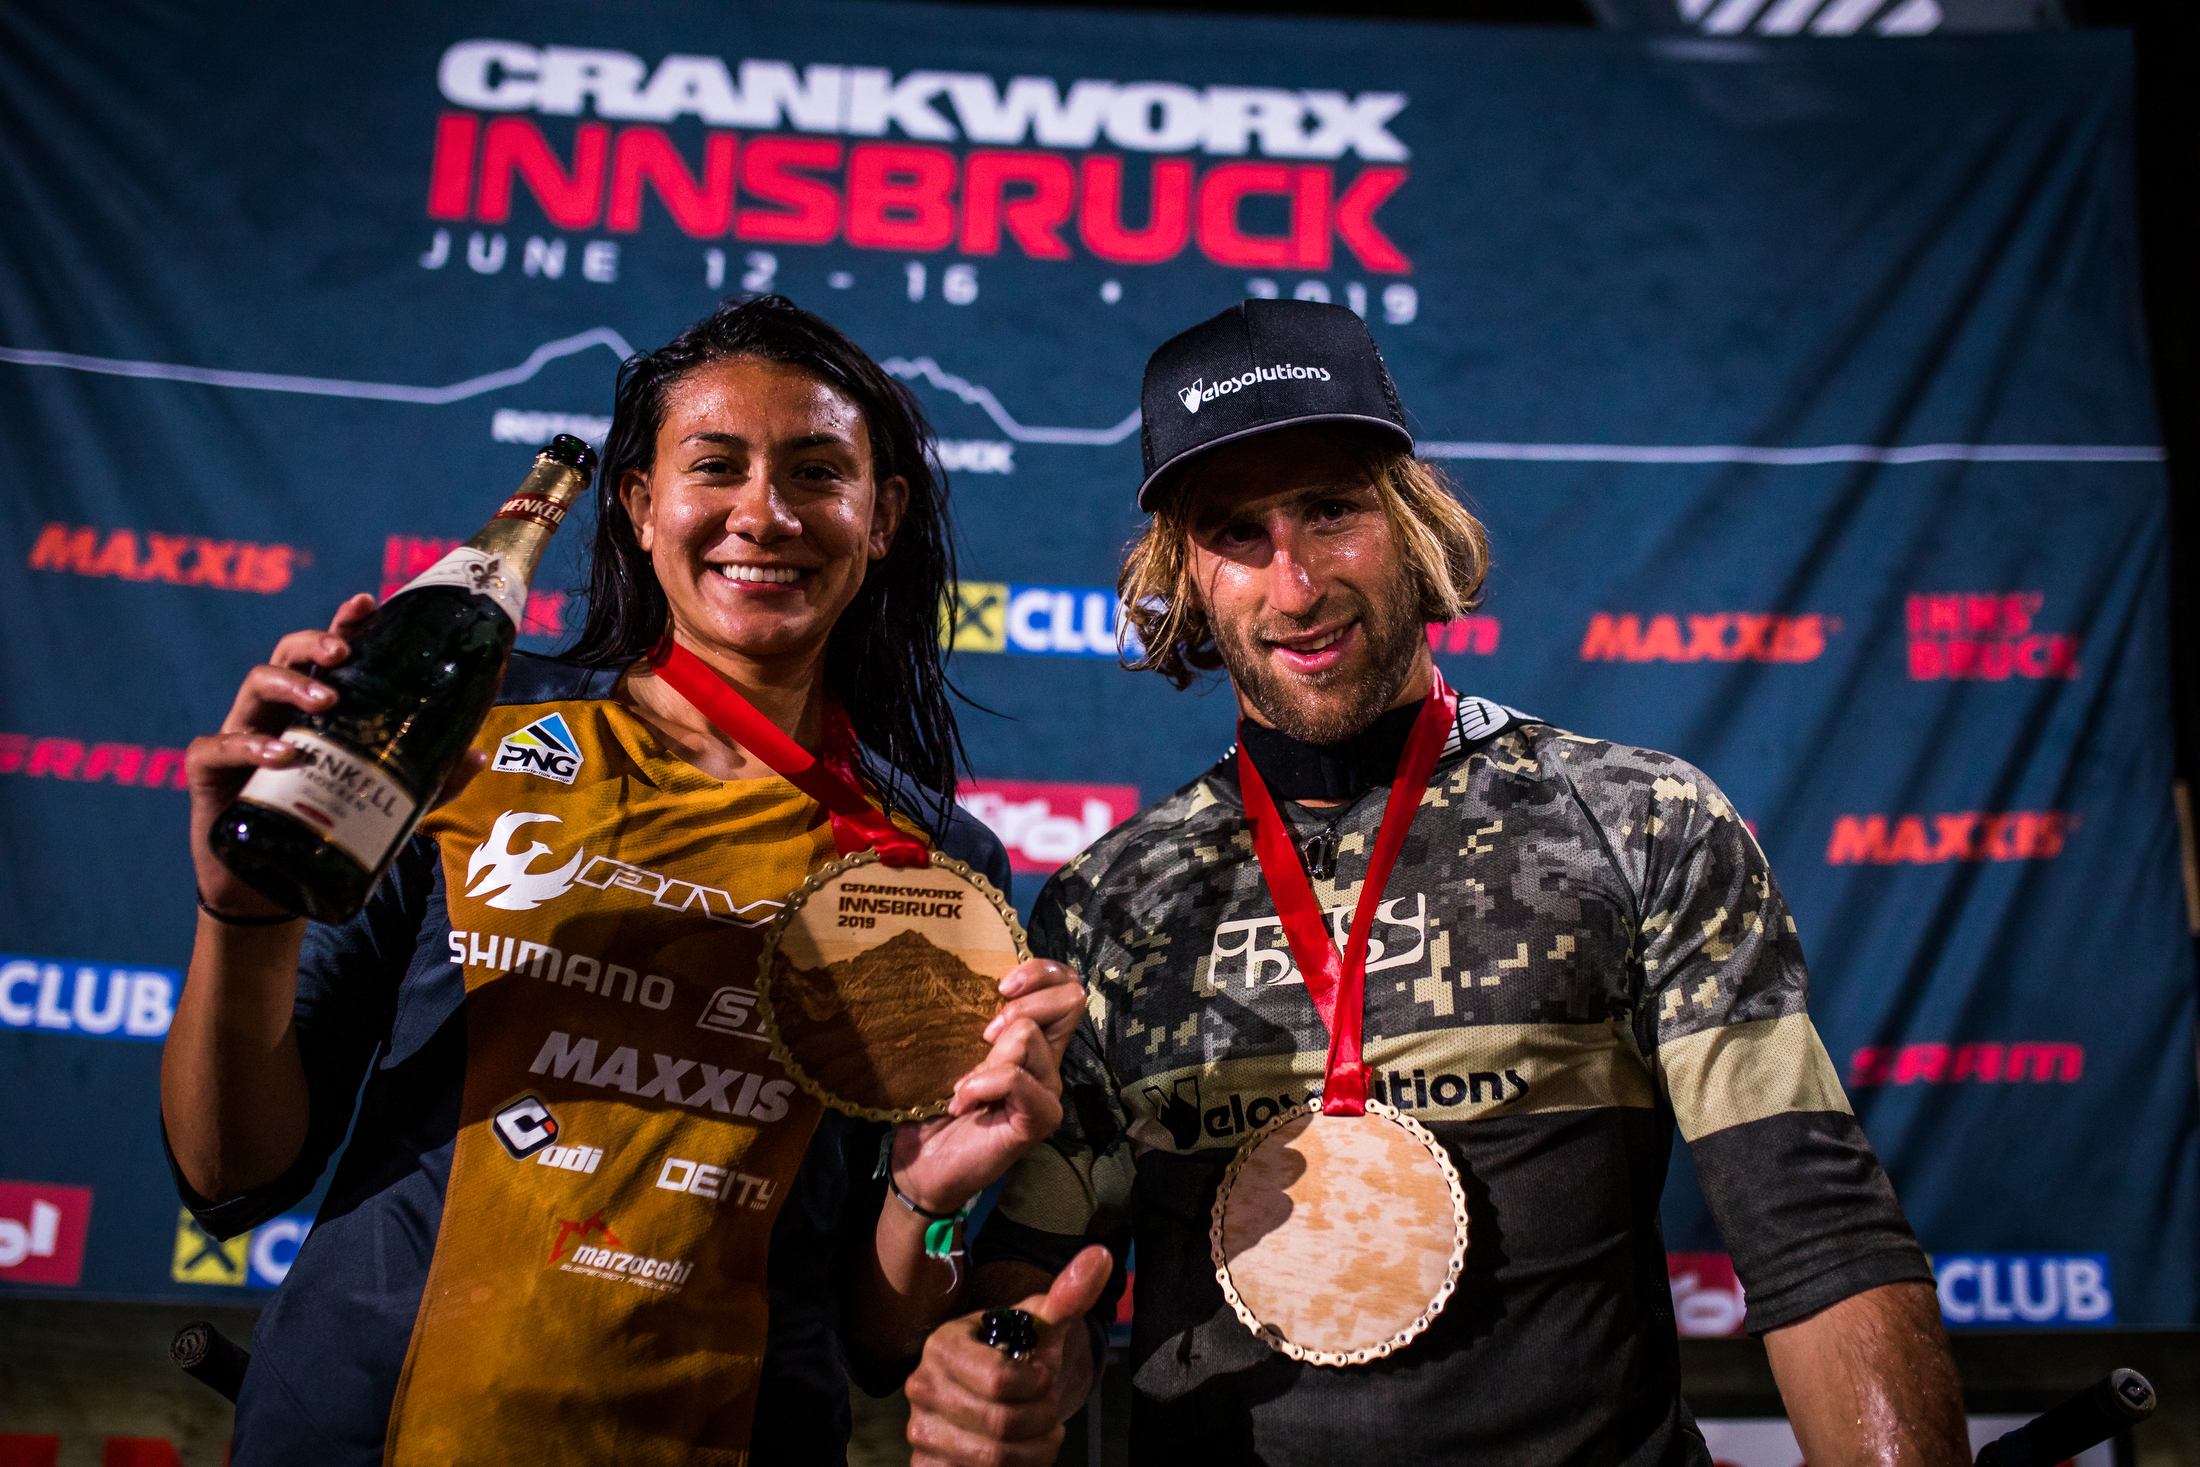 Kialani Hines and Adrien Loron pose for a photo after the victory celebration. Crankworx Innsbruck 2019.